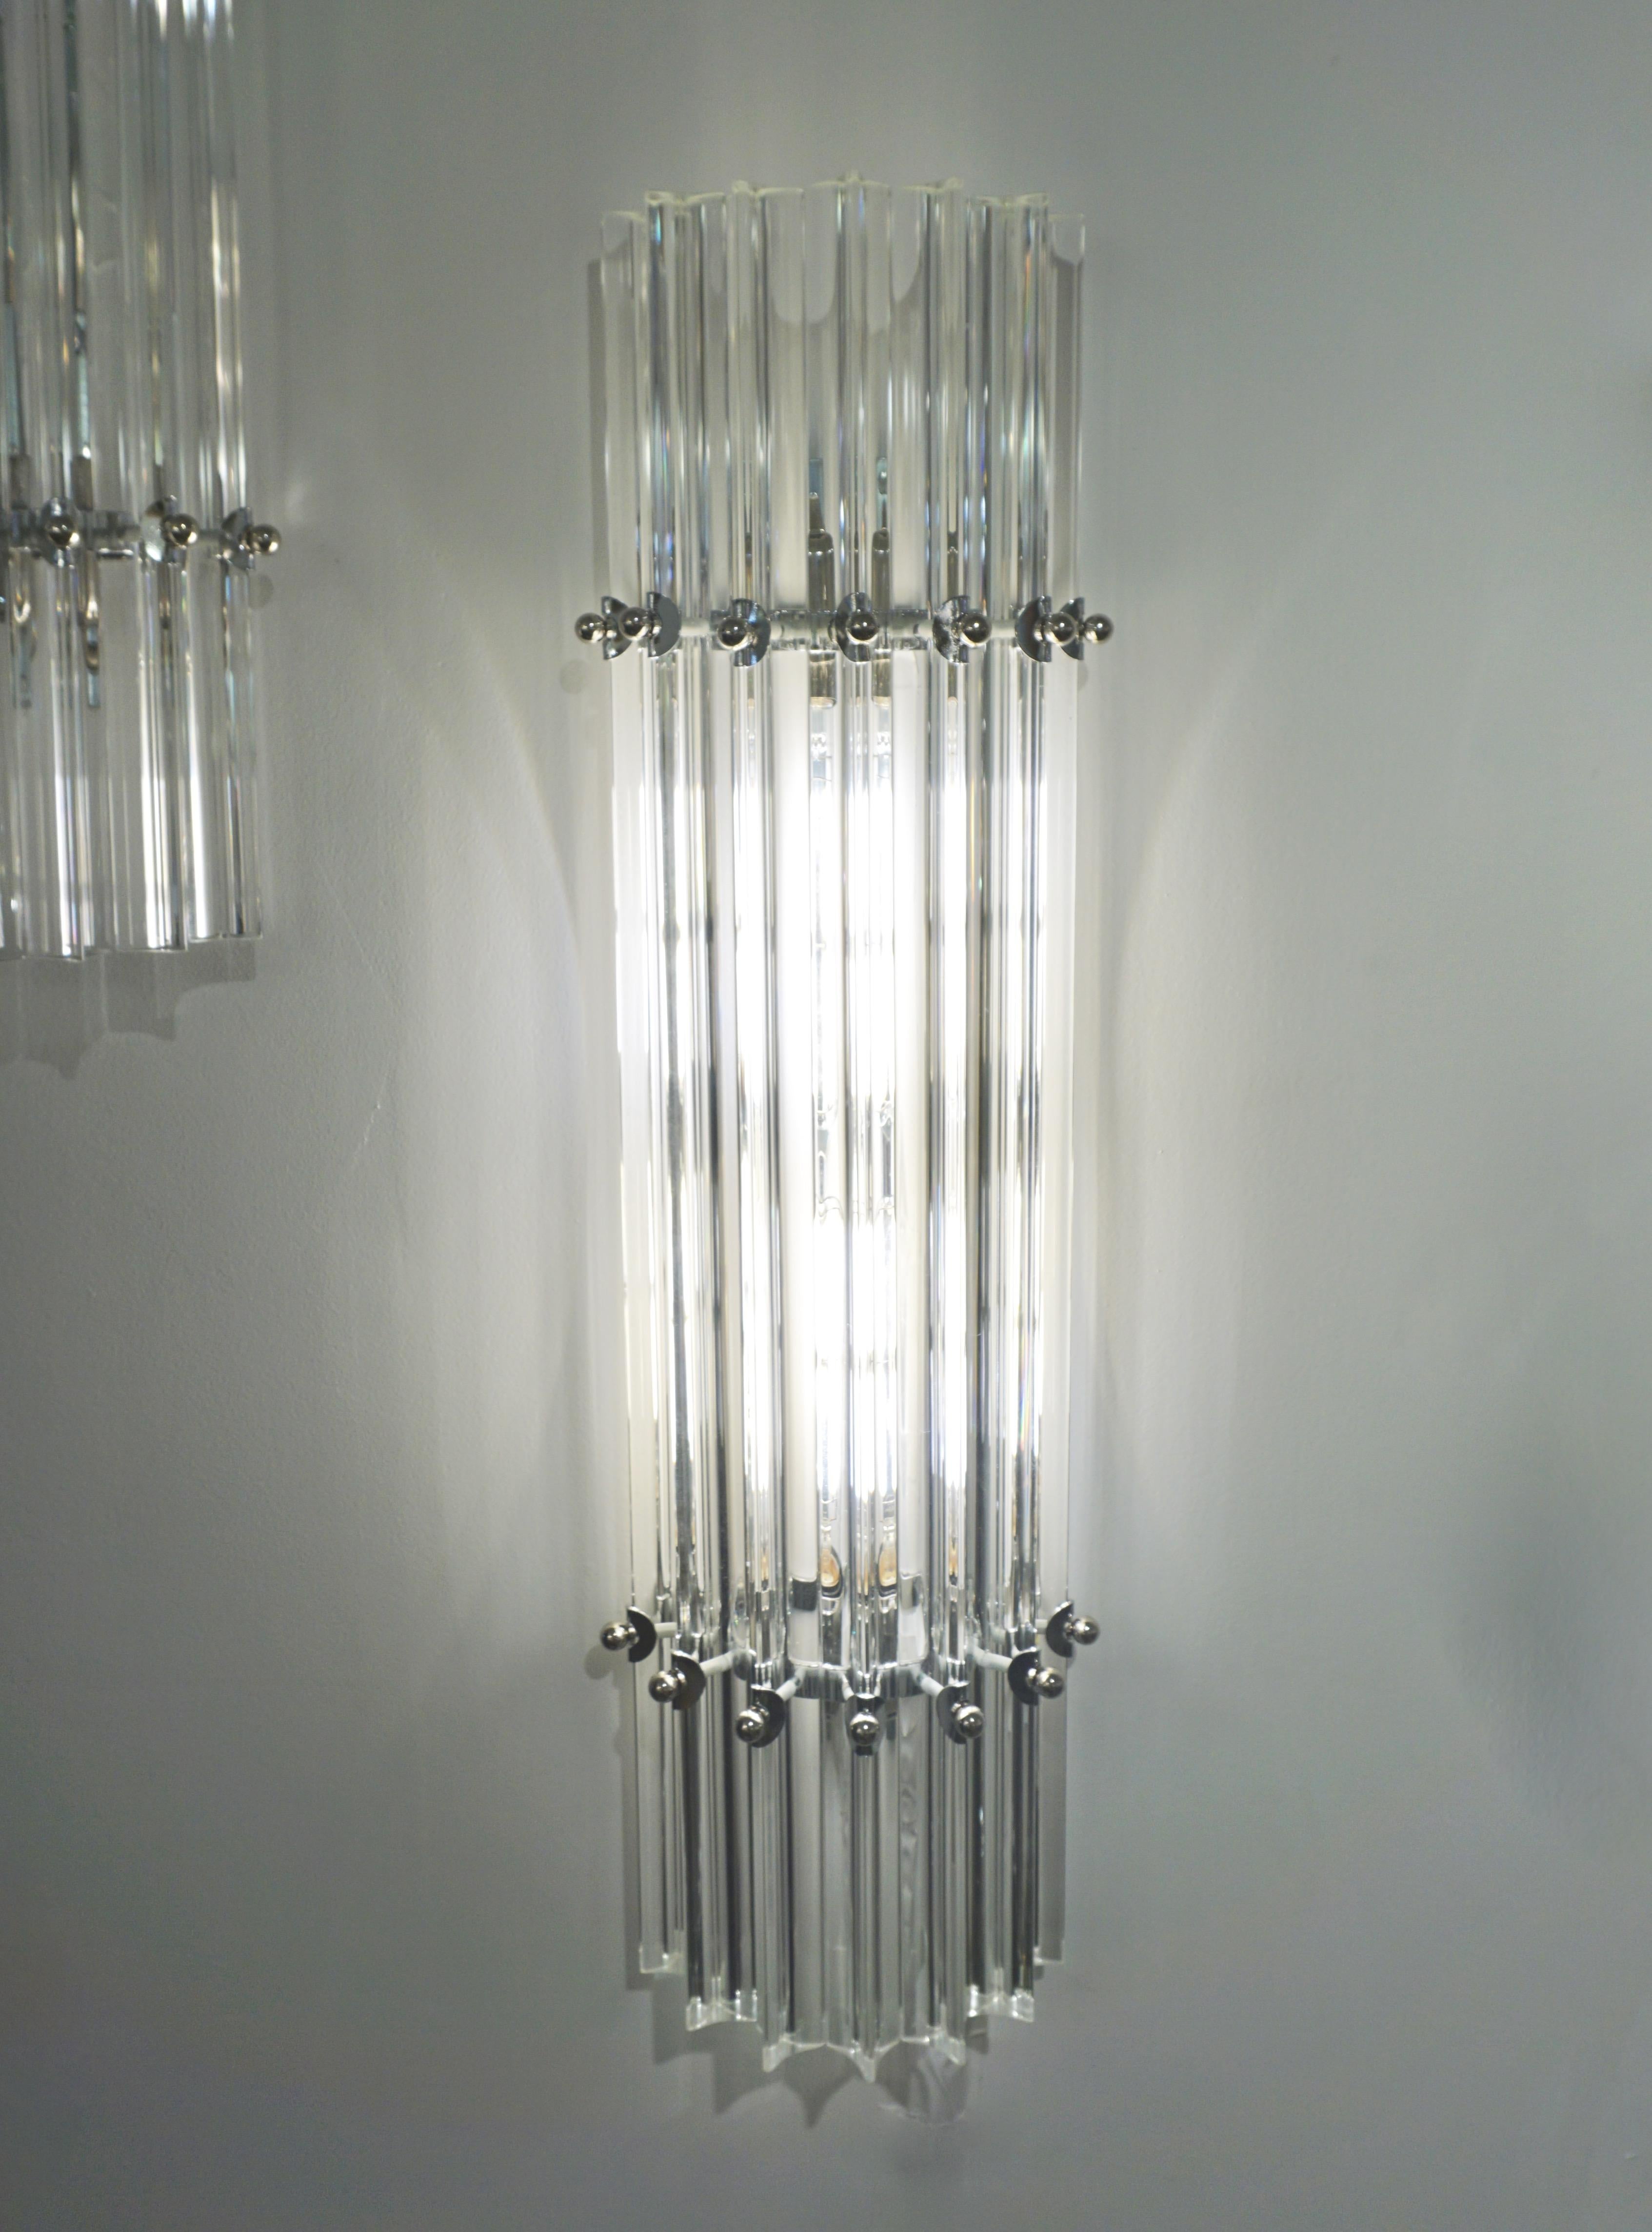 Very sleek custom Venetian pair of wall lights with organic minimalist design, consisting of seven straight crystal clear Murano glass rods of triangular section with amazing concave sides, that not only highlight the curved design but amplify the